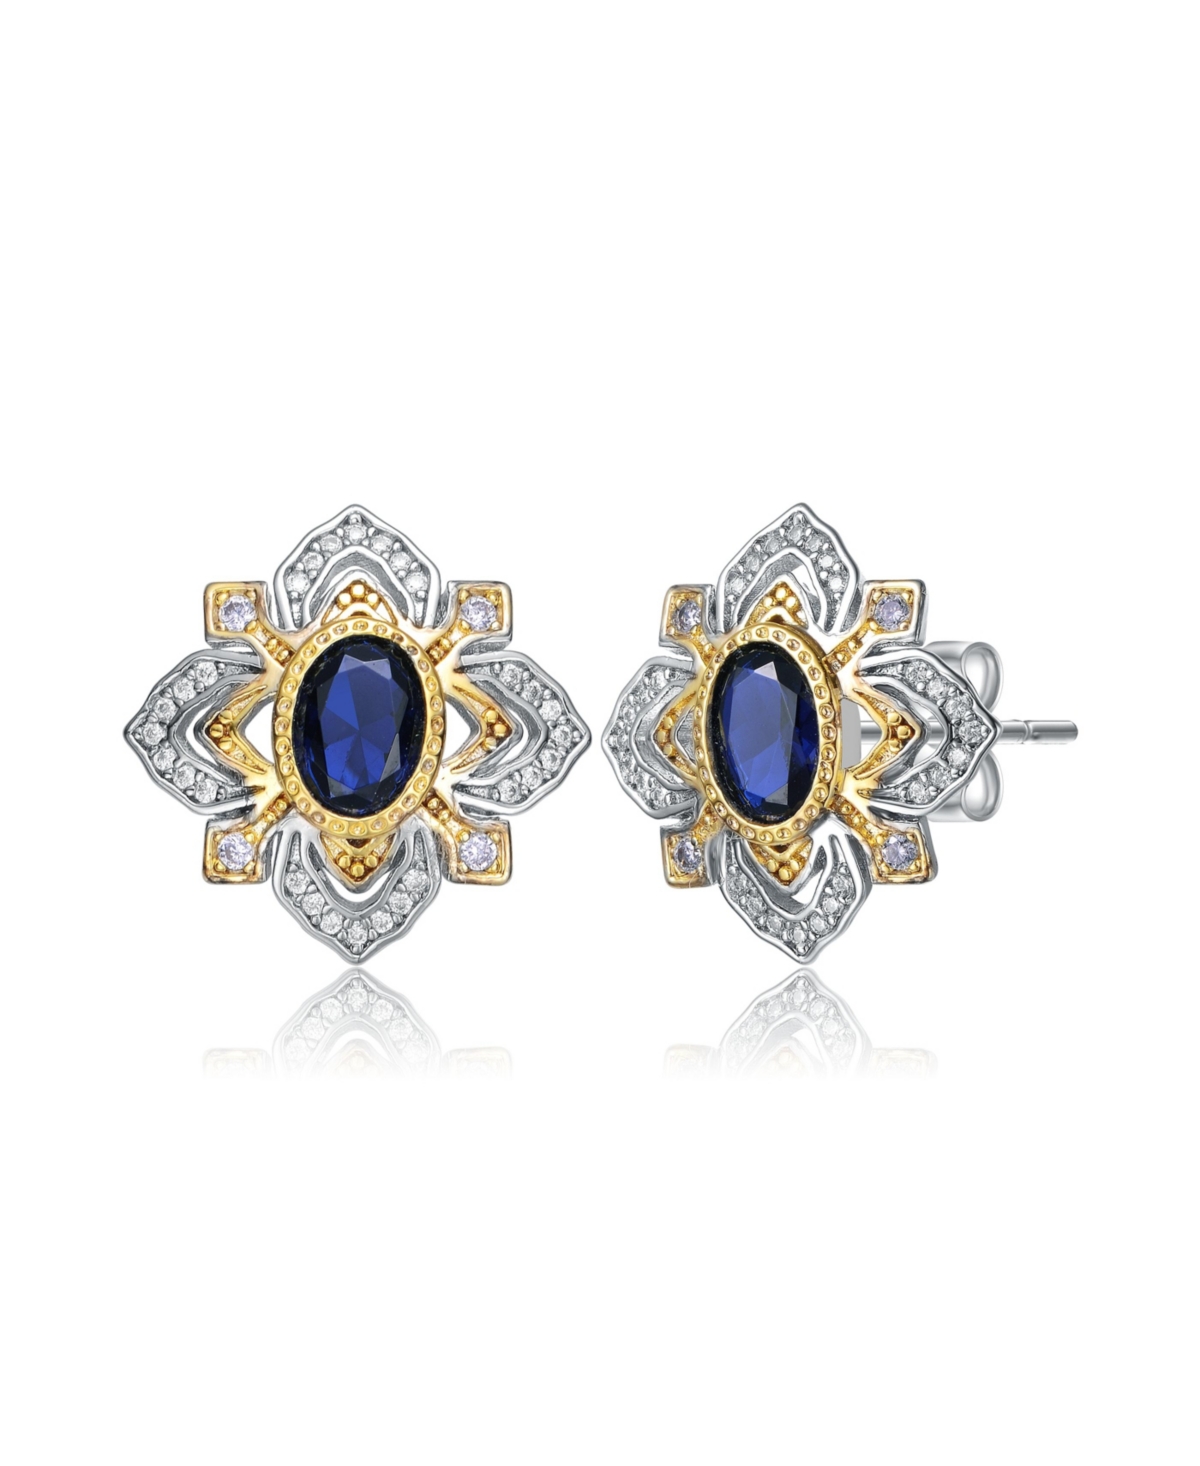 Classy White Gold Plated and 14K Gold Plated with Cubic Zirconia Stud Earrings - Blue